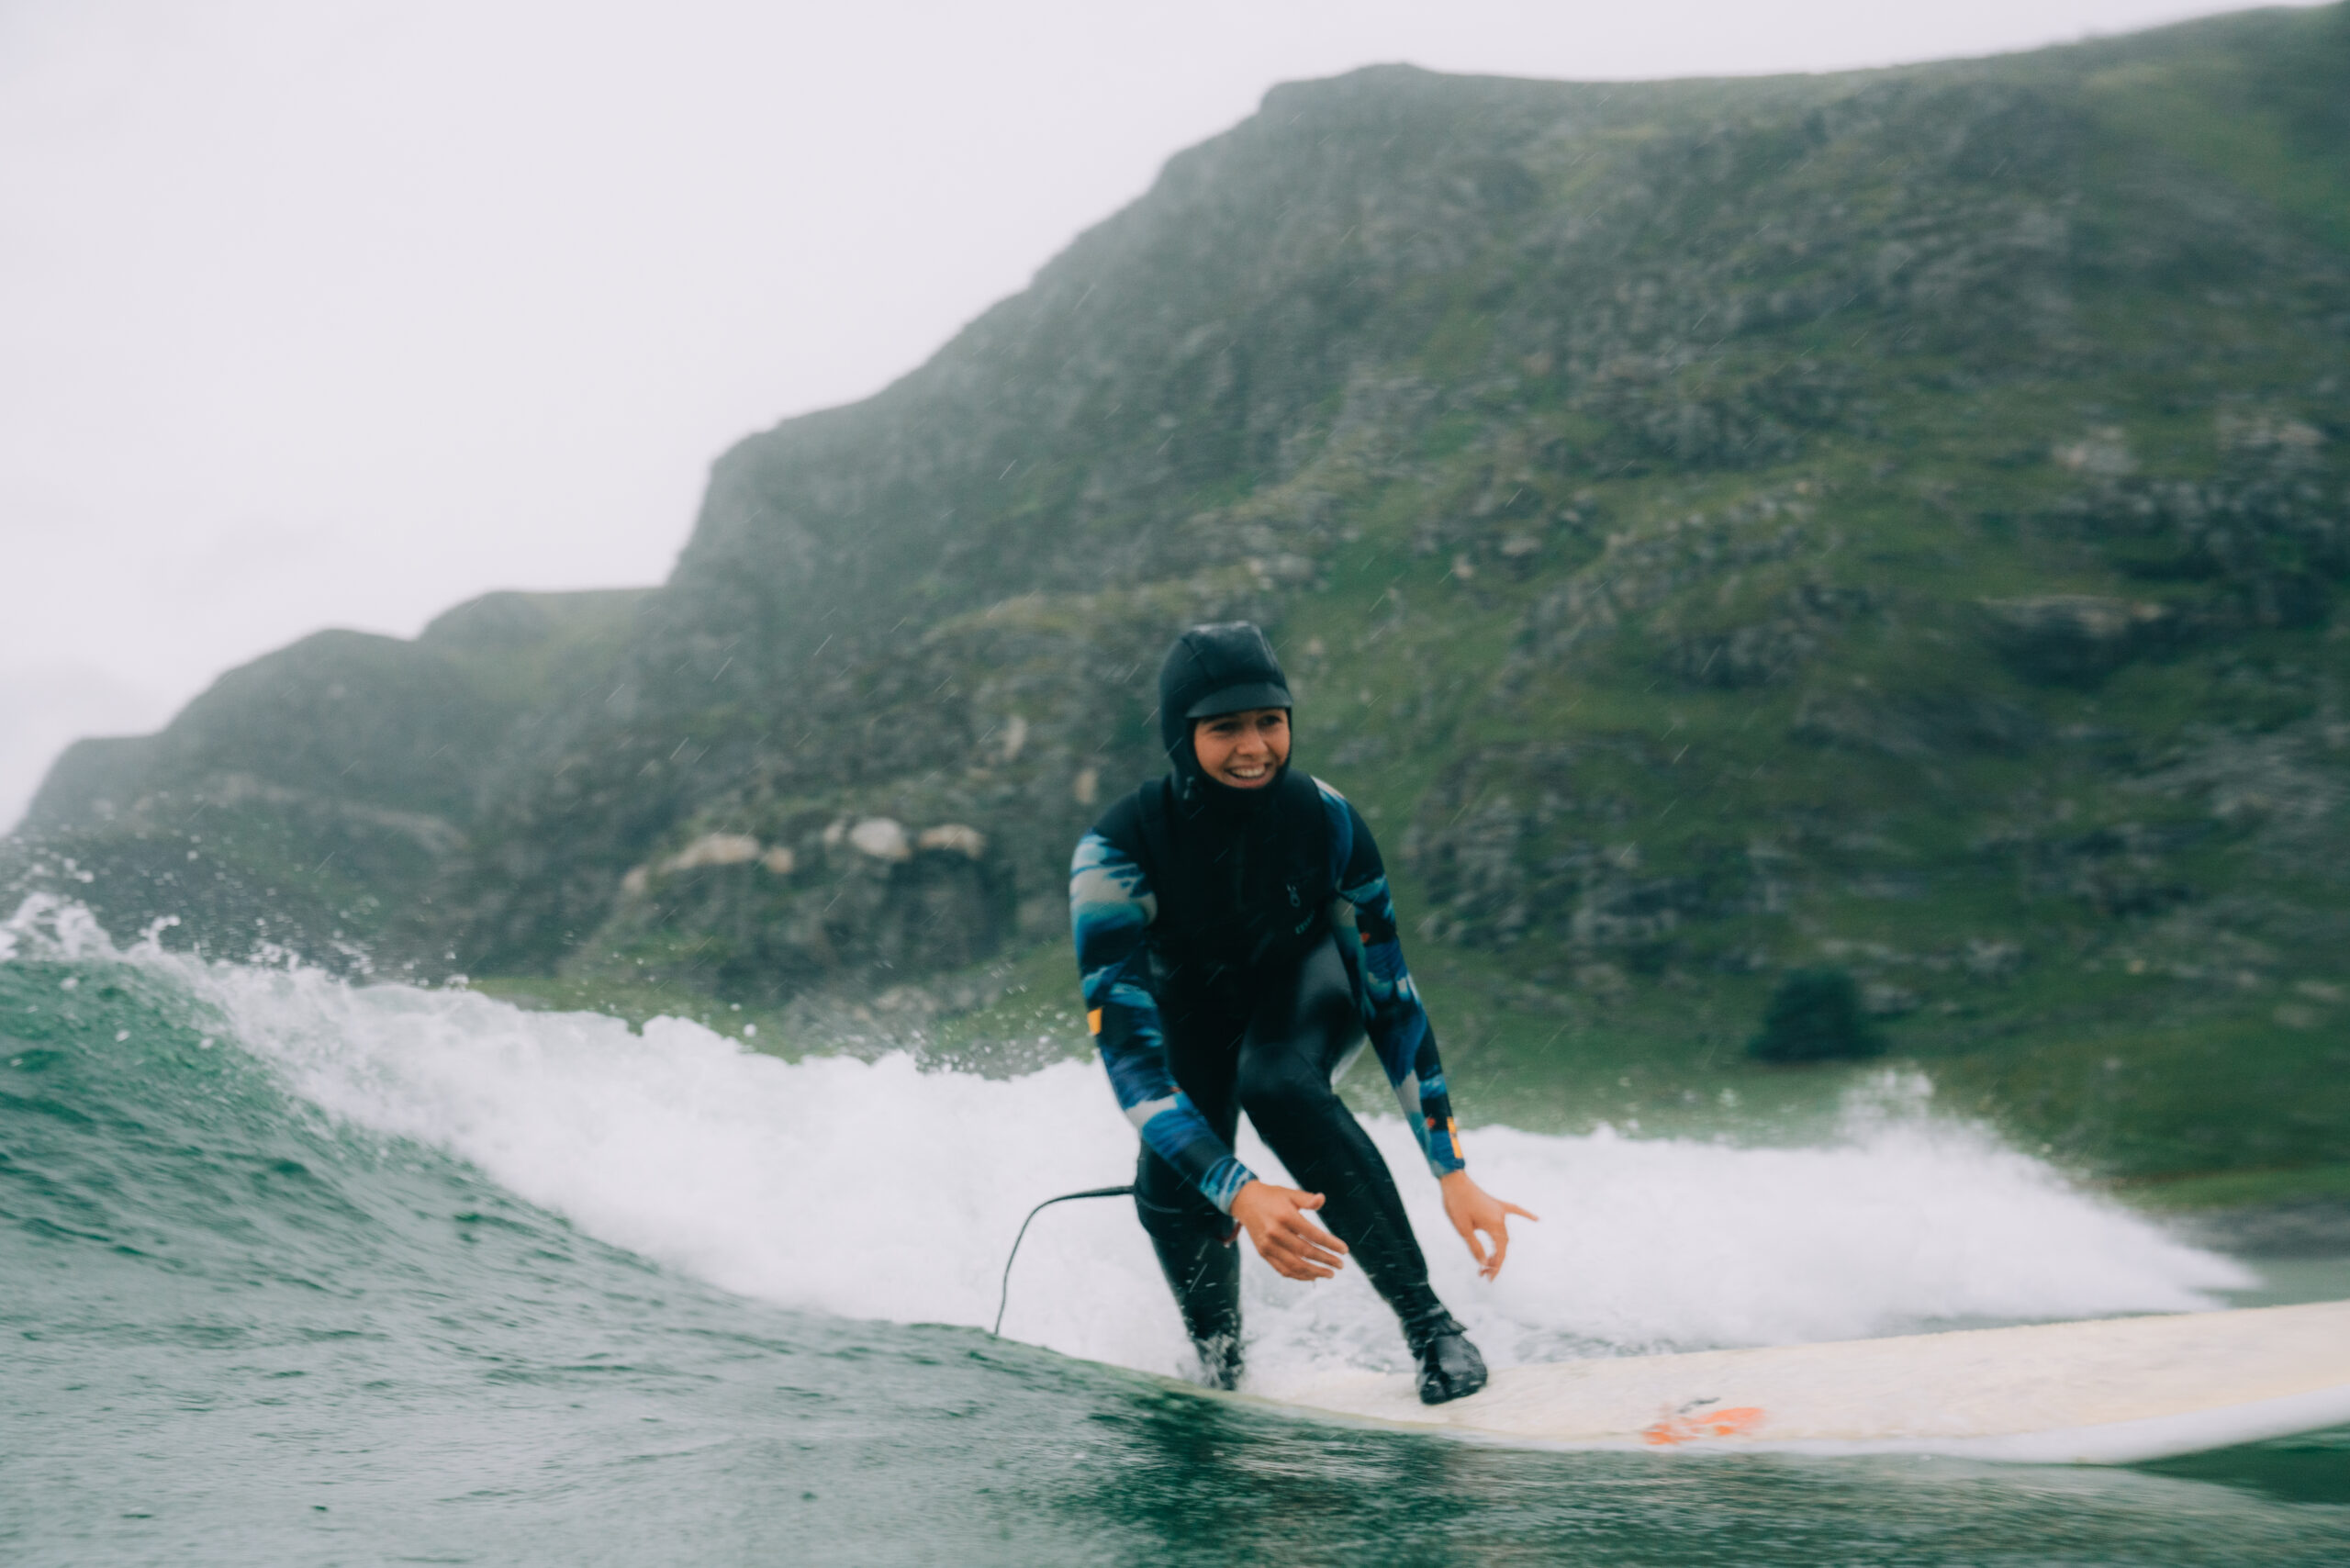 Surf Gear to Keep You Warm This Winter